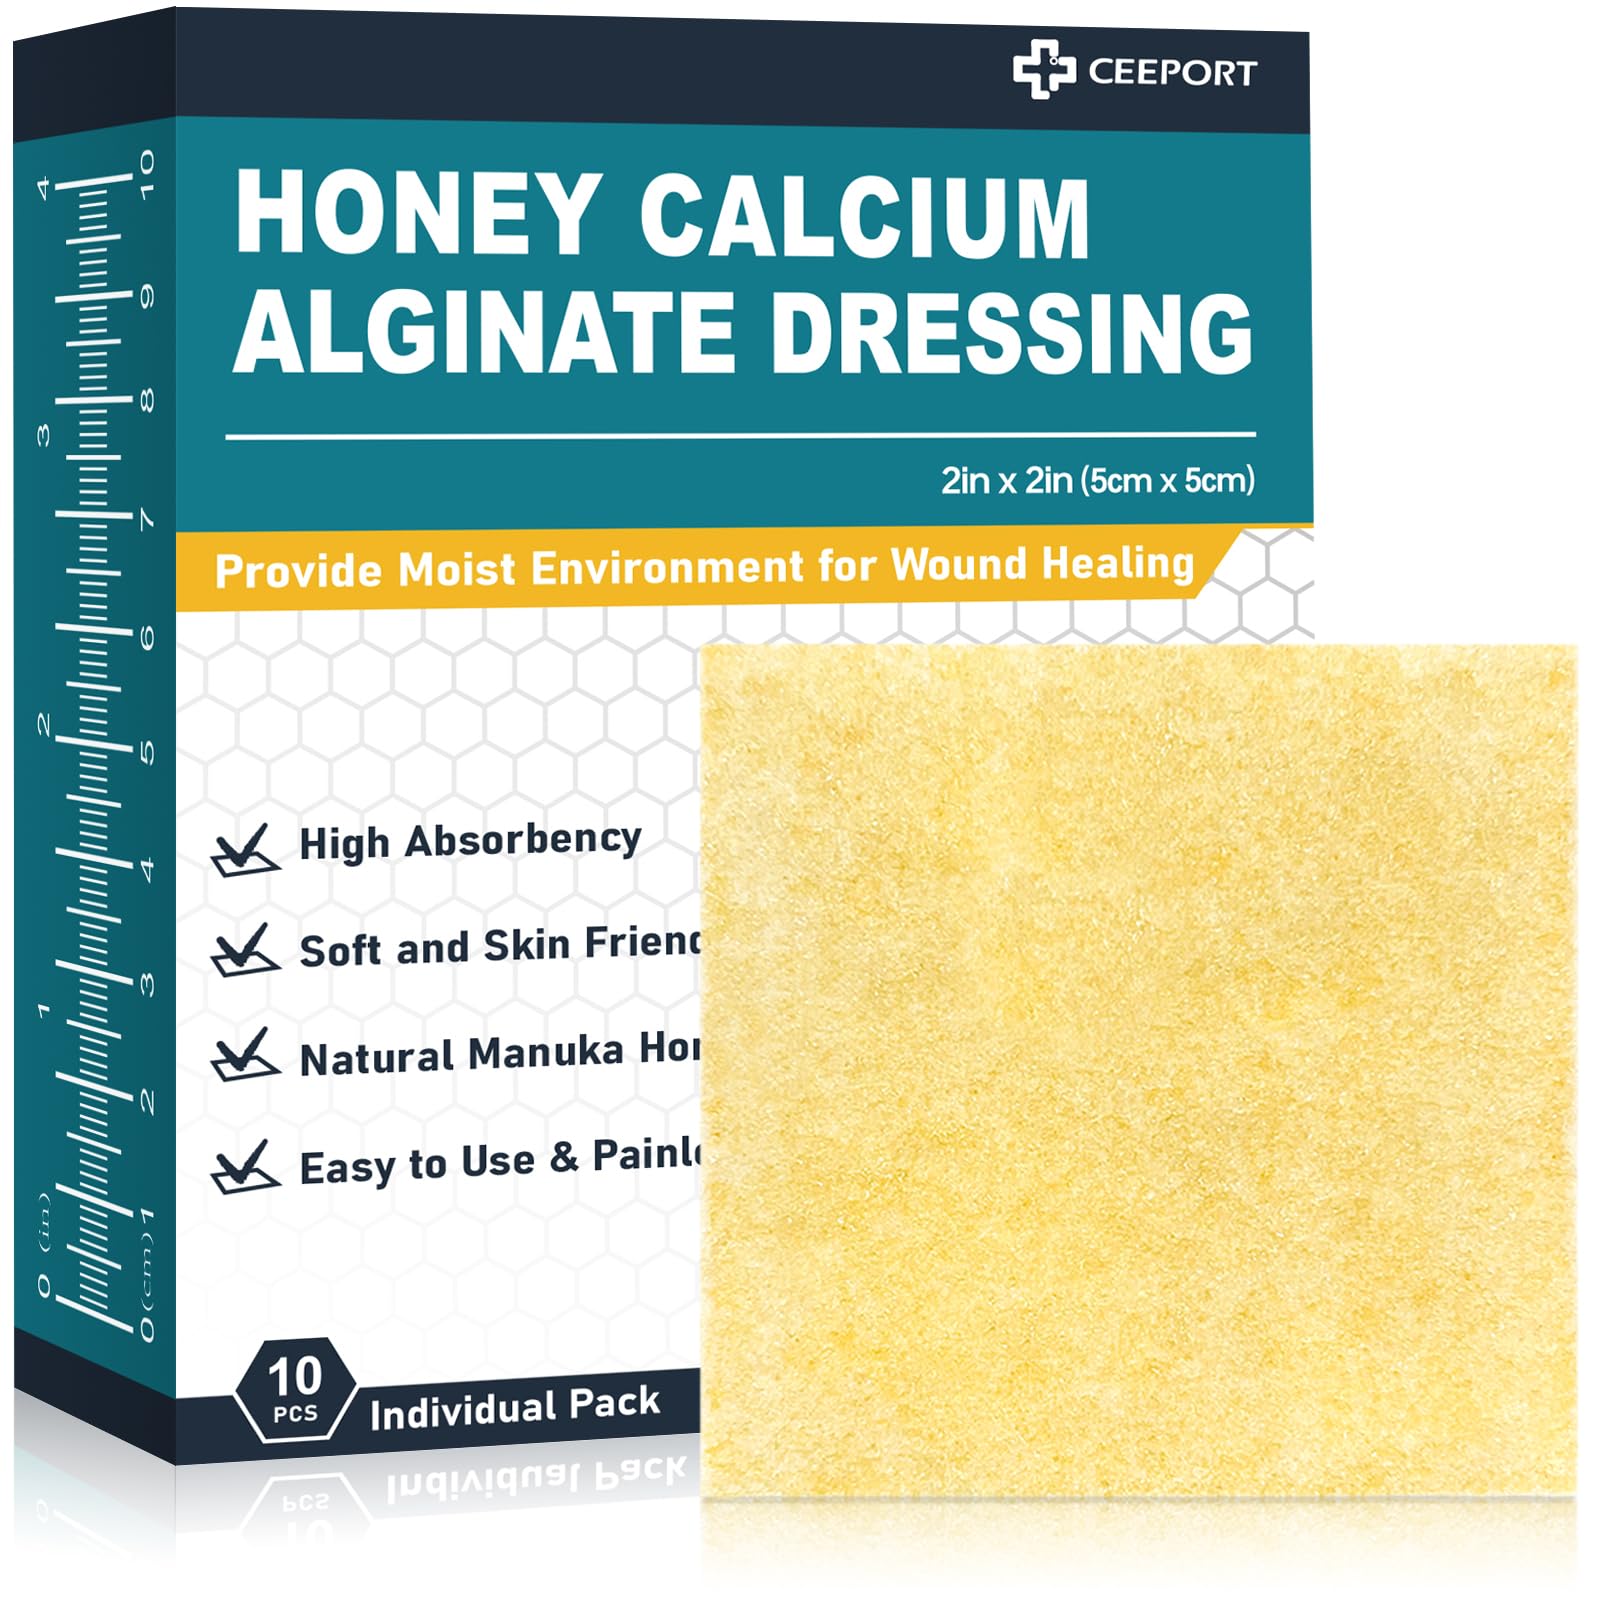 Ceeport Manuka Honey Calcium Alginate Wound Dressing, 2"x 2" High Absorbency Honey Wound Dressing with Calcium Alginate, Medical Grade Manuka Honey Wound Care Bandages Patches for Wounds(Pack of 10)